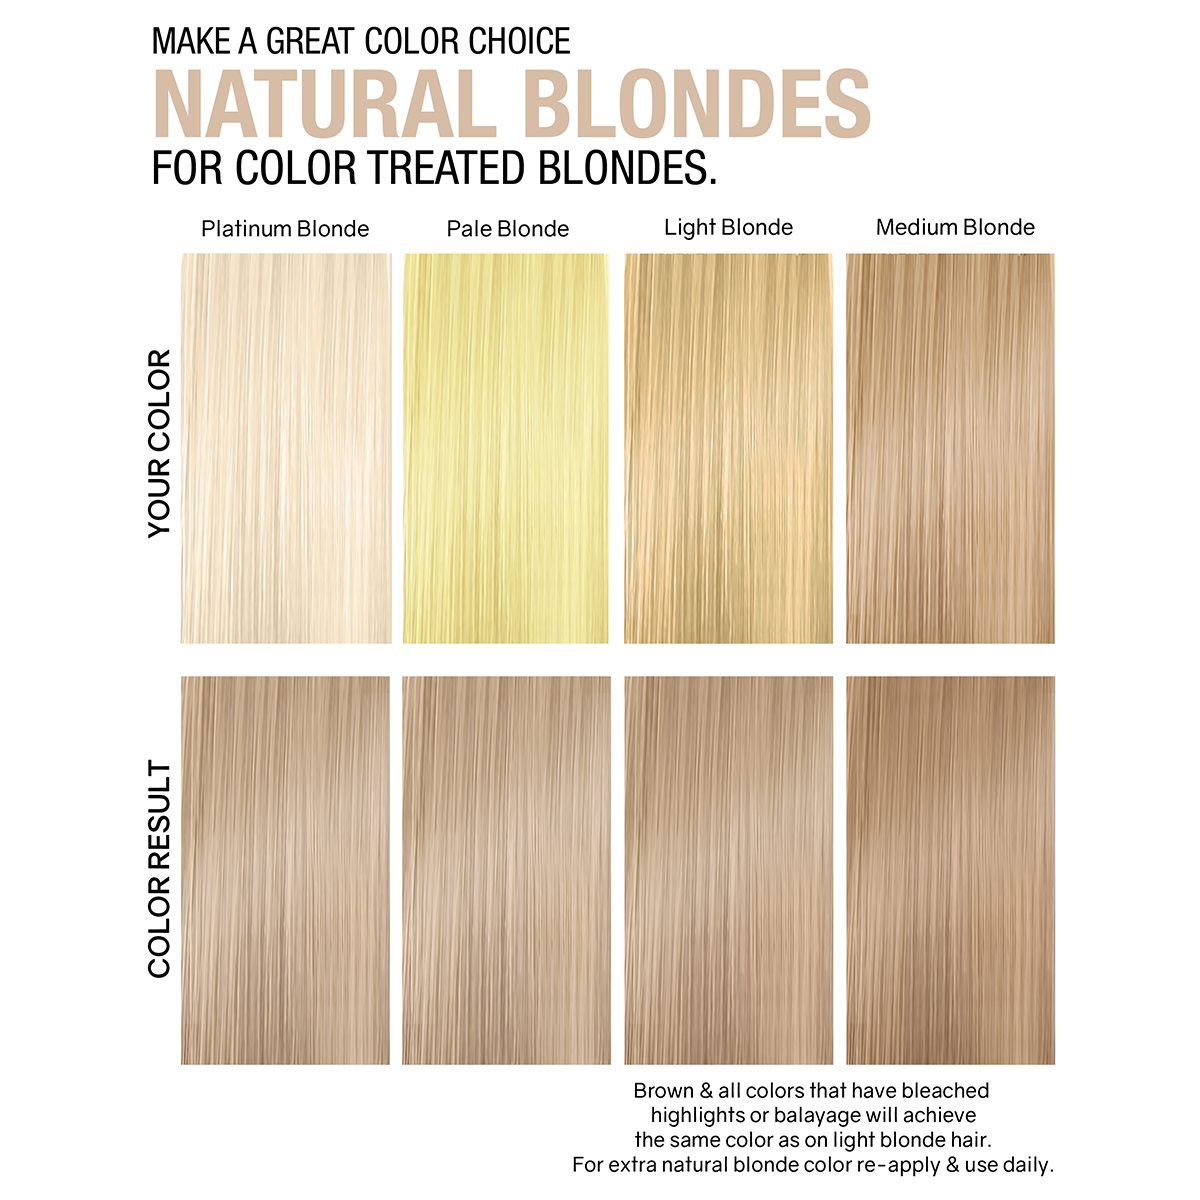 Natural Blonde for color treated blondes.